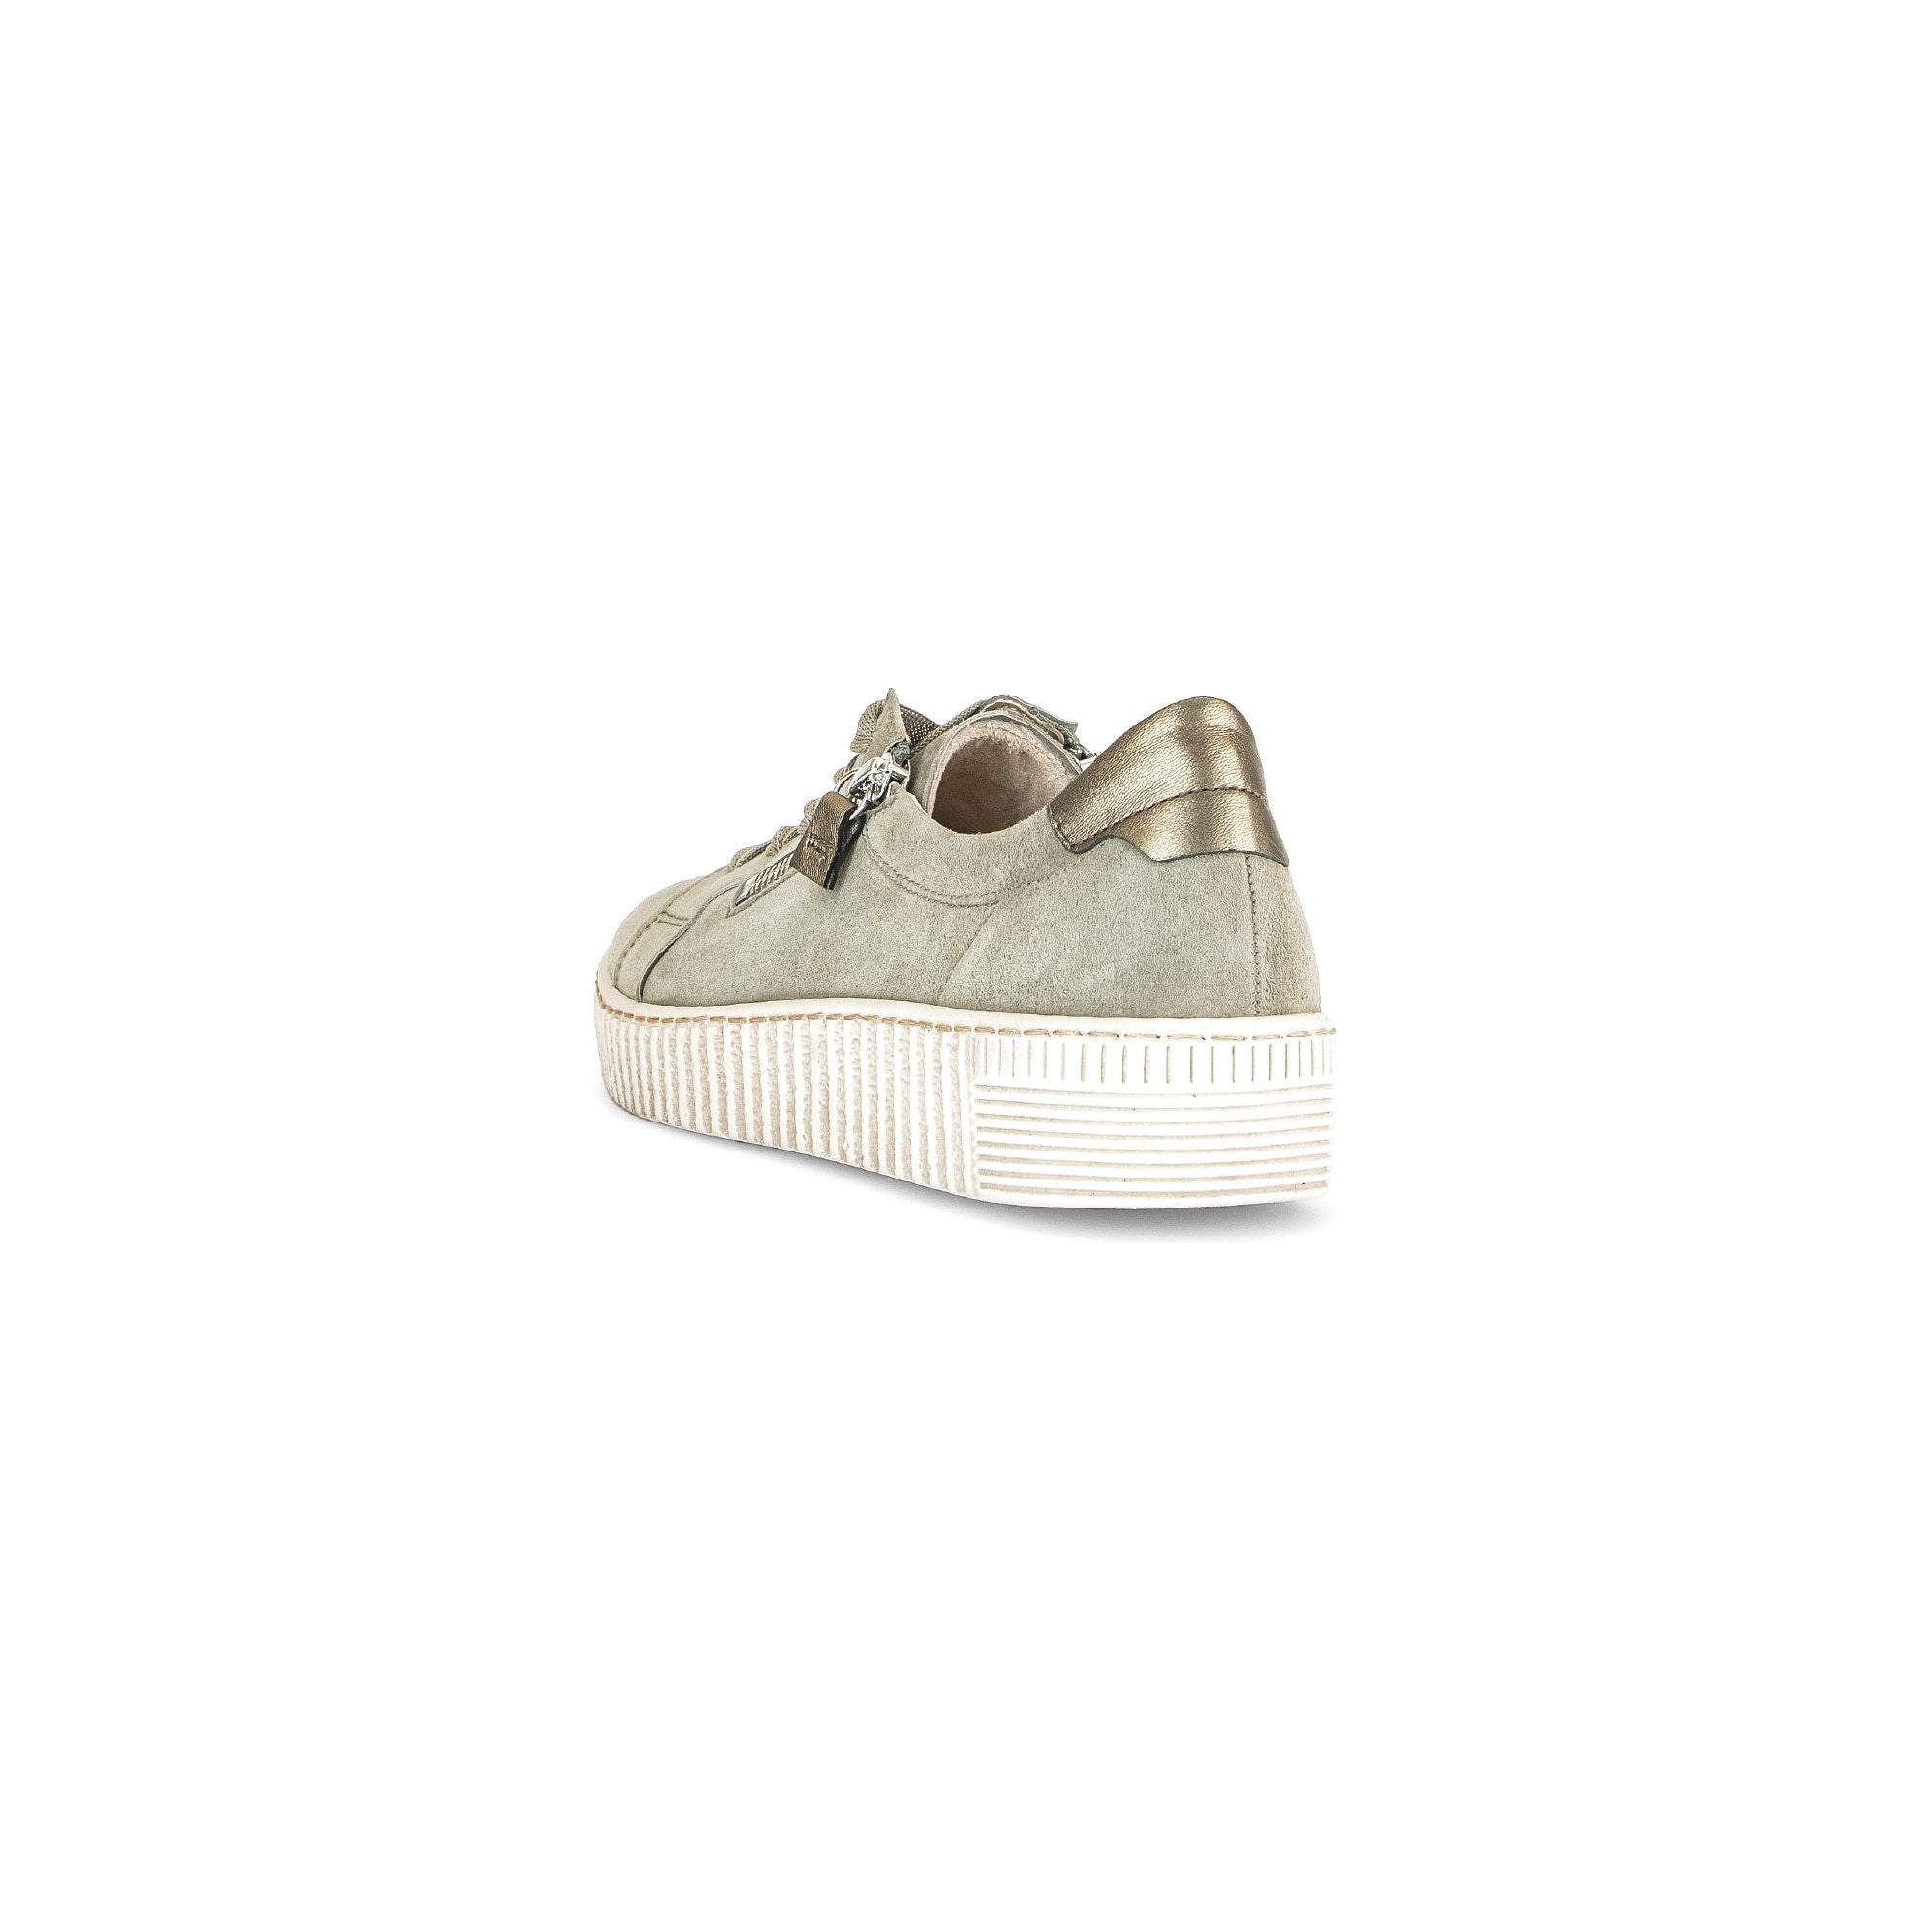 Gabor Wisdom(43.334.11) - Ladies Lace Trainer with Double Zip in Sage Green Suede. Gabor Shoes | Wisemans | Bantry | Shoe Shop | West Cork | Ireland